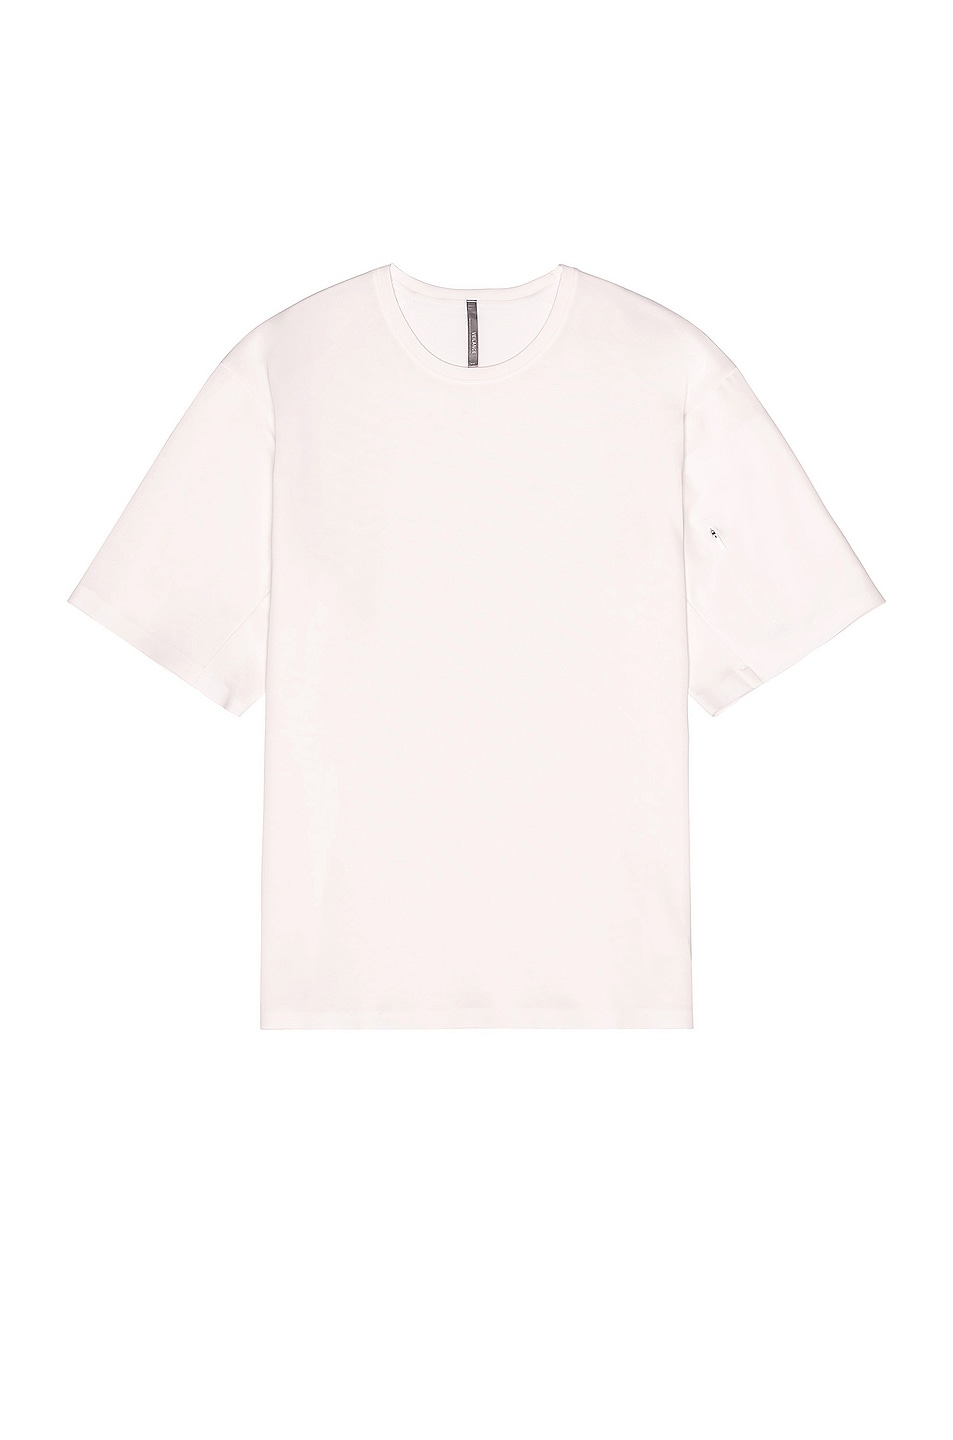 Image 1 of Veilance Ionic Pocket Tee in Light